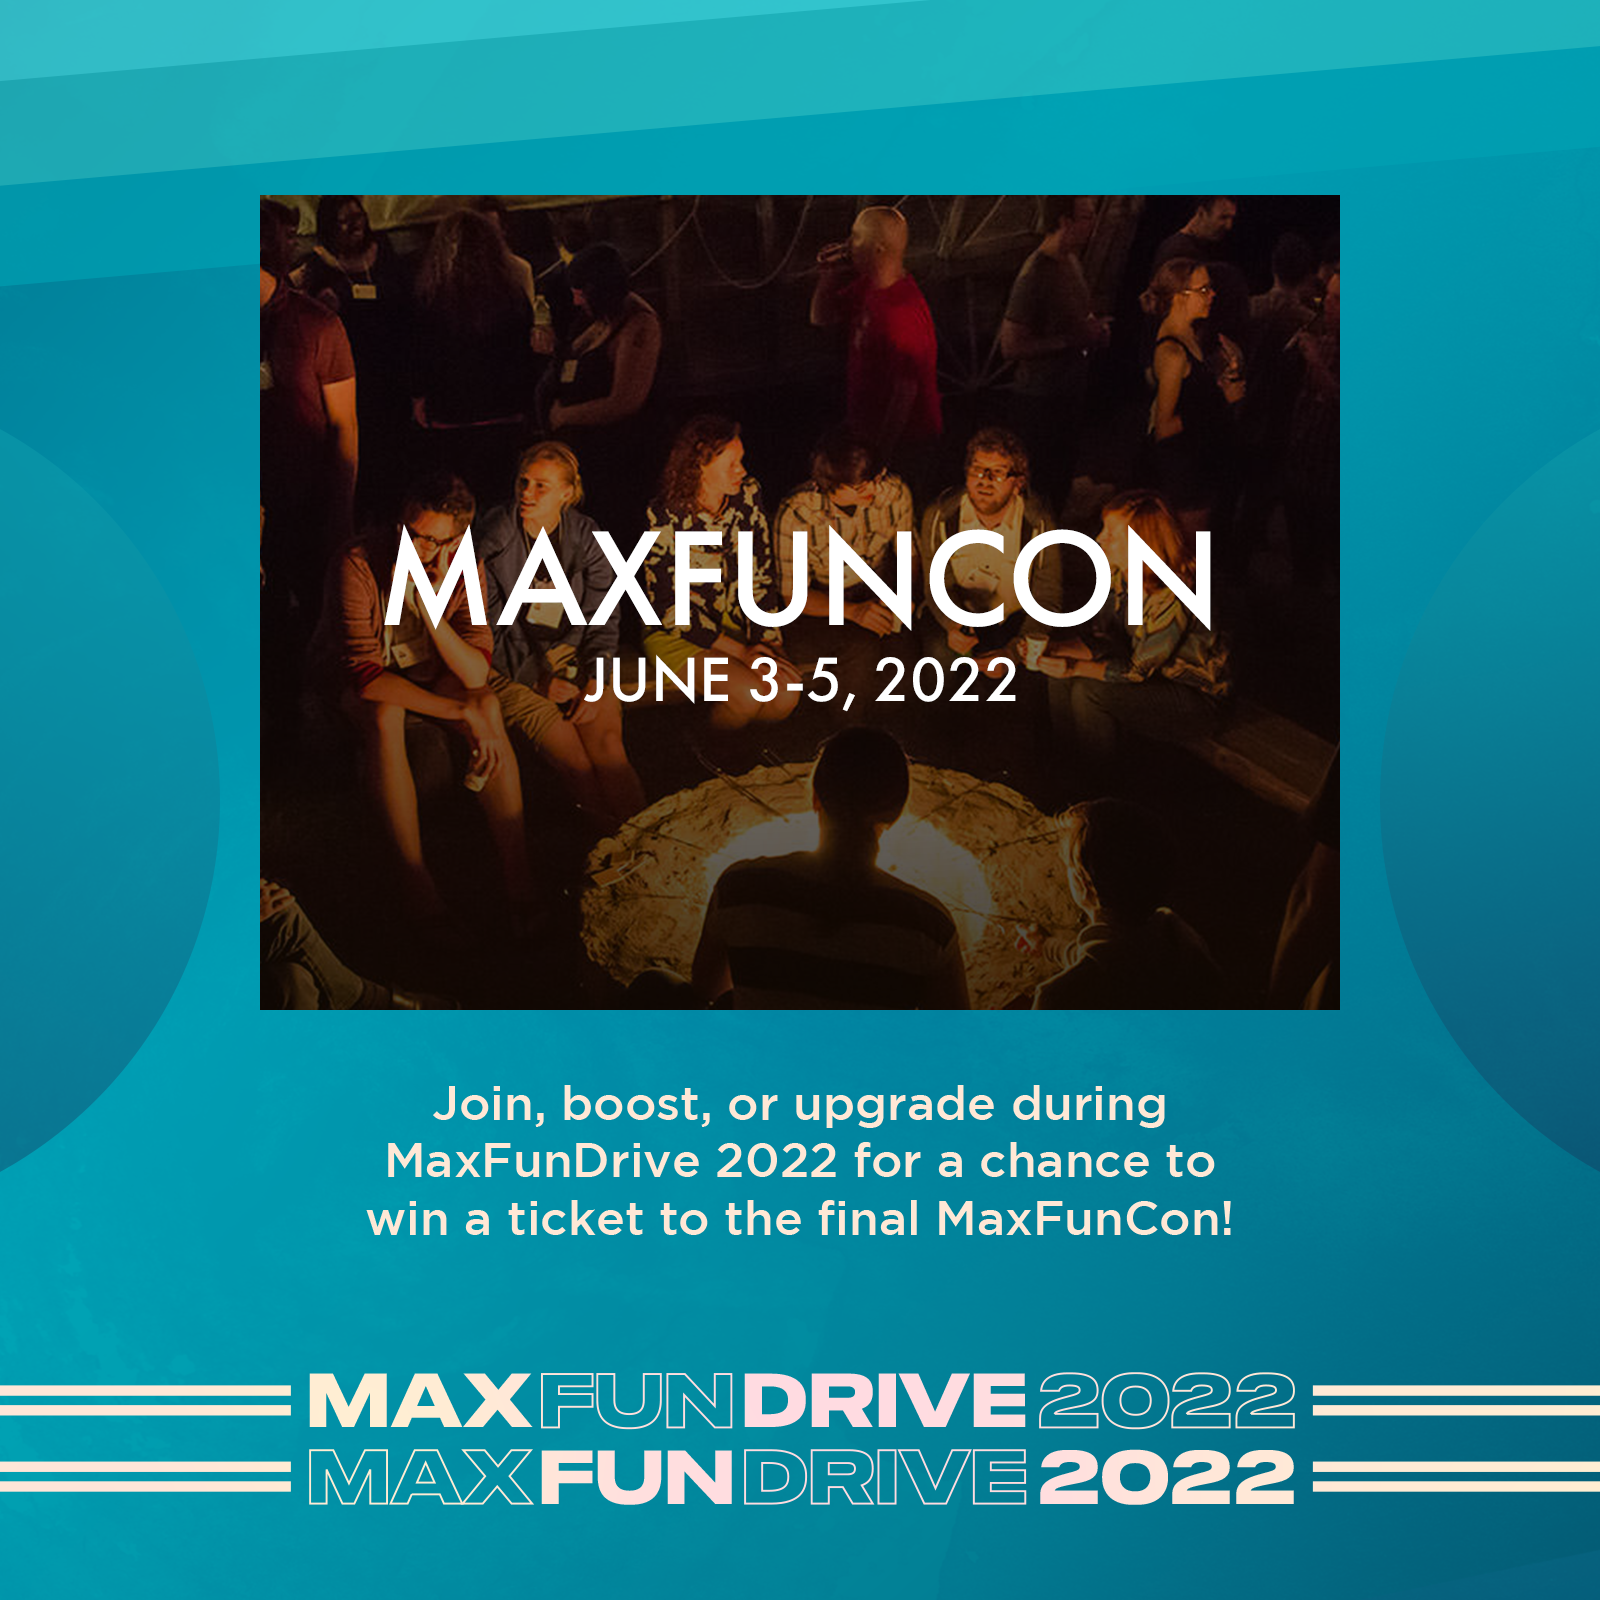 A photo of a campfire and the words MaxFunCon June 3-5, 2022. Text that says "join, boost, or upgrade during the MaxFunDrive for a chance to win a ticket to MaxFunCon!